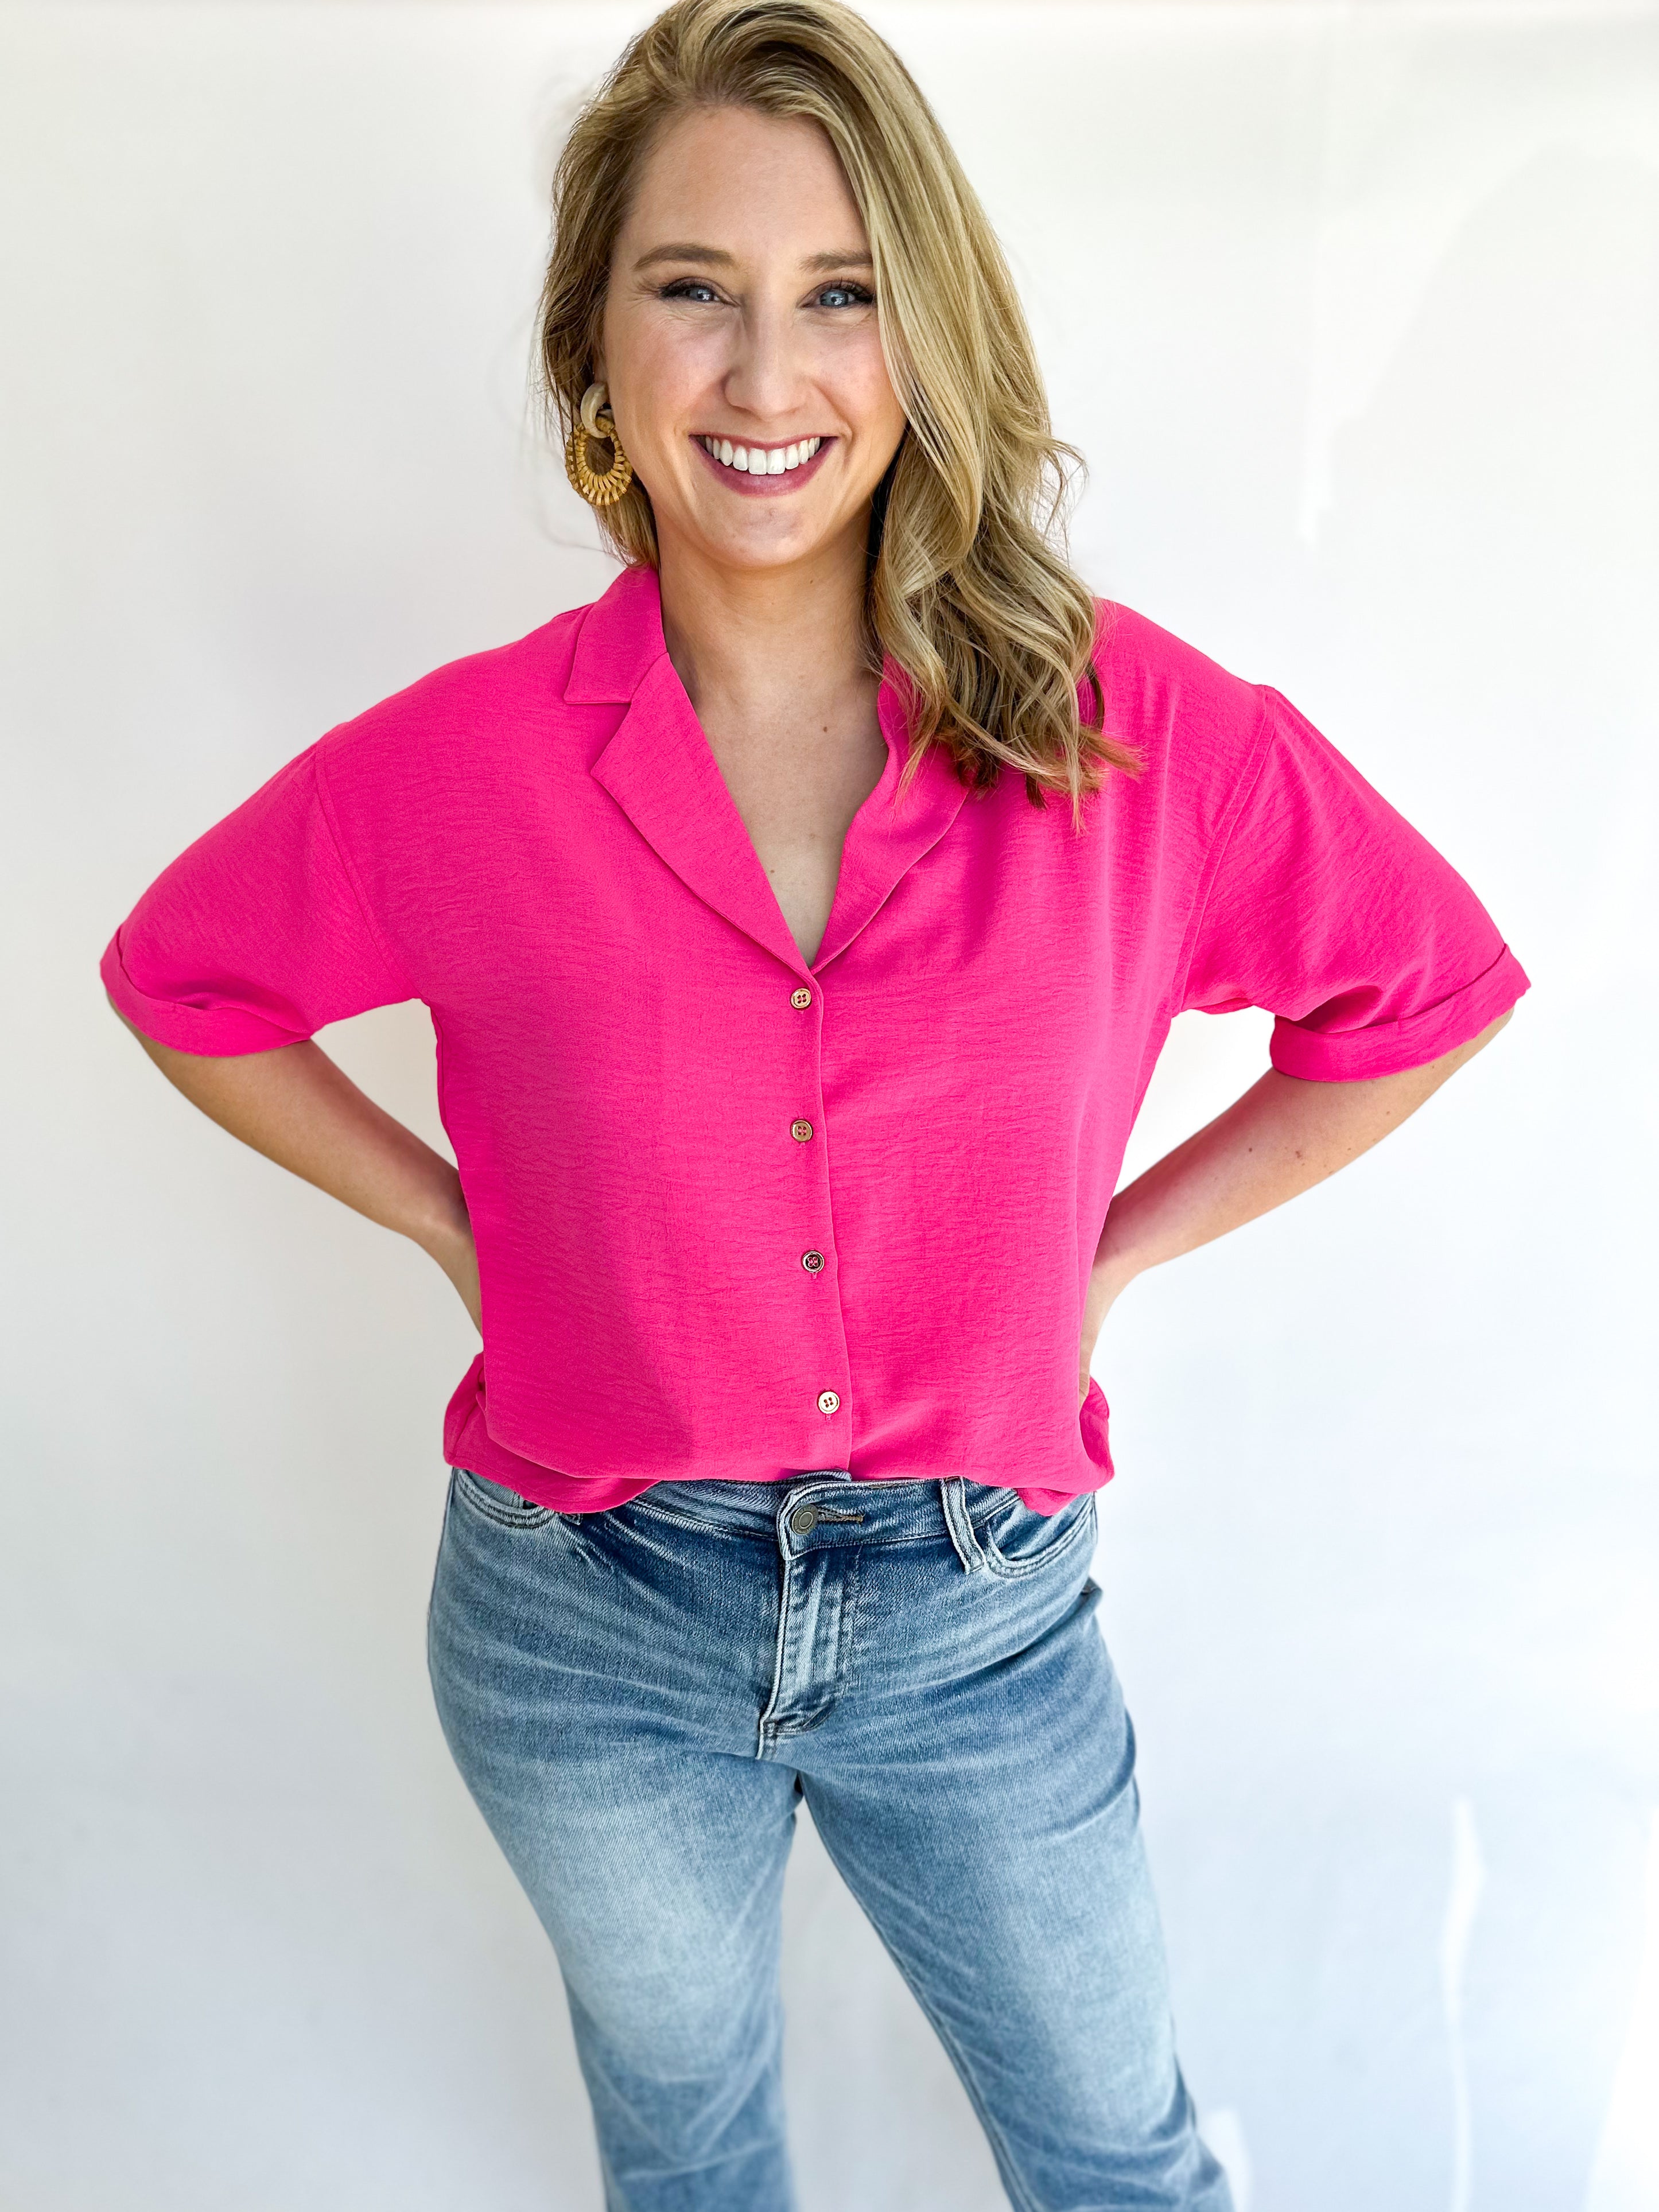 Throw On And Go Blouse - Pink-200 Fashion Blouses-ENTRO-July & June Women's Fashion Boutique Located in San Antonio, Texas